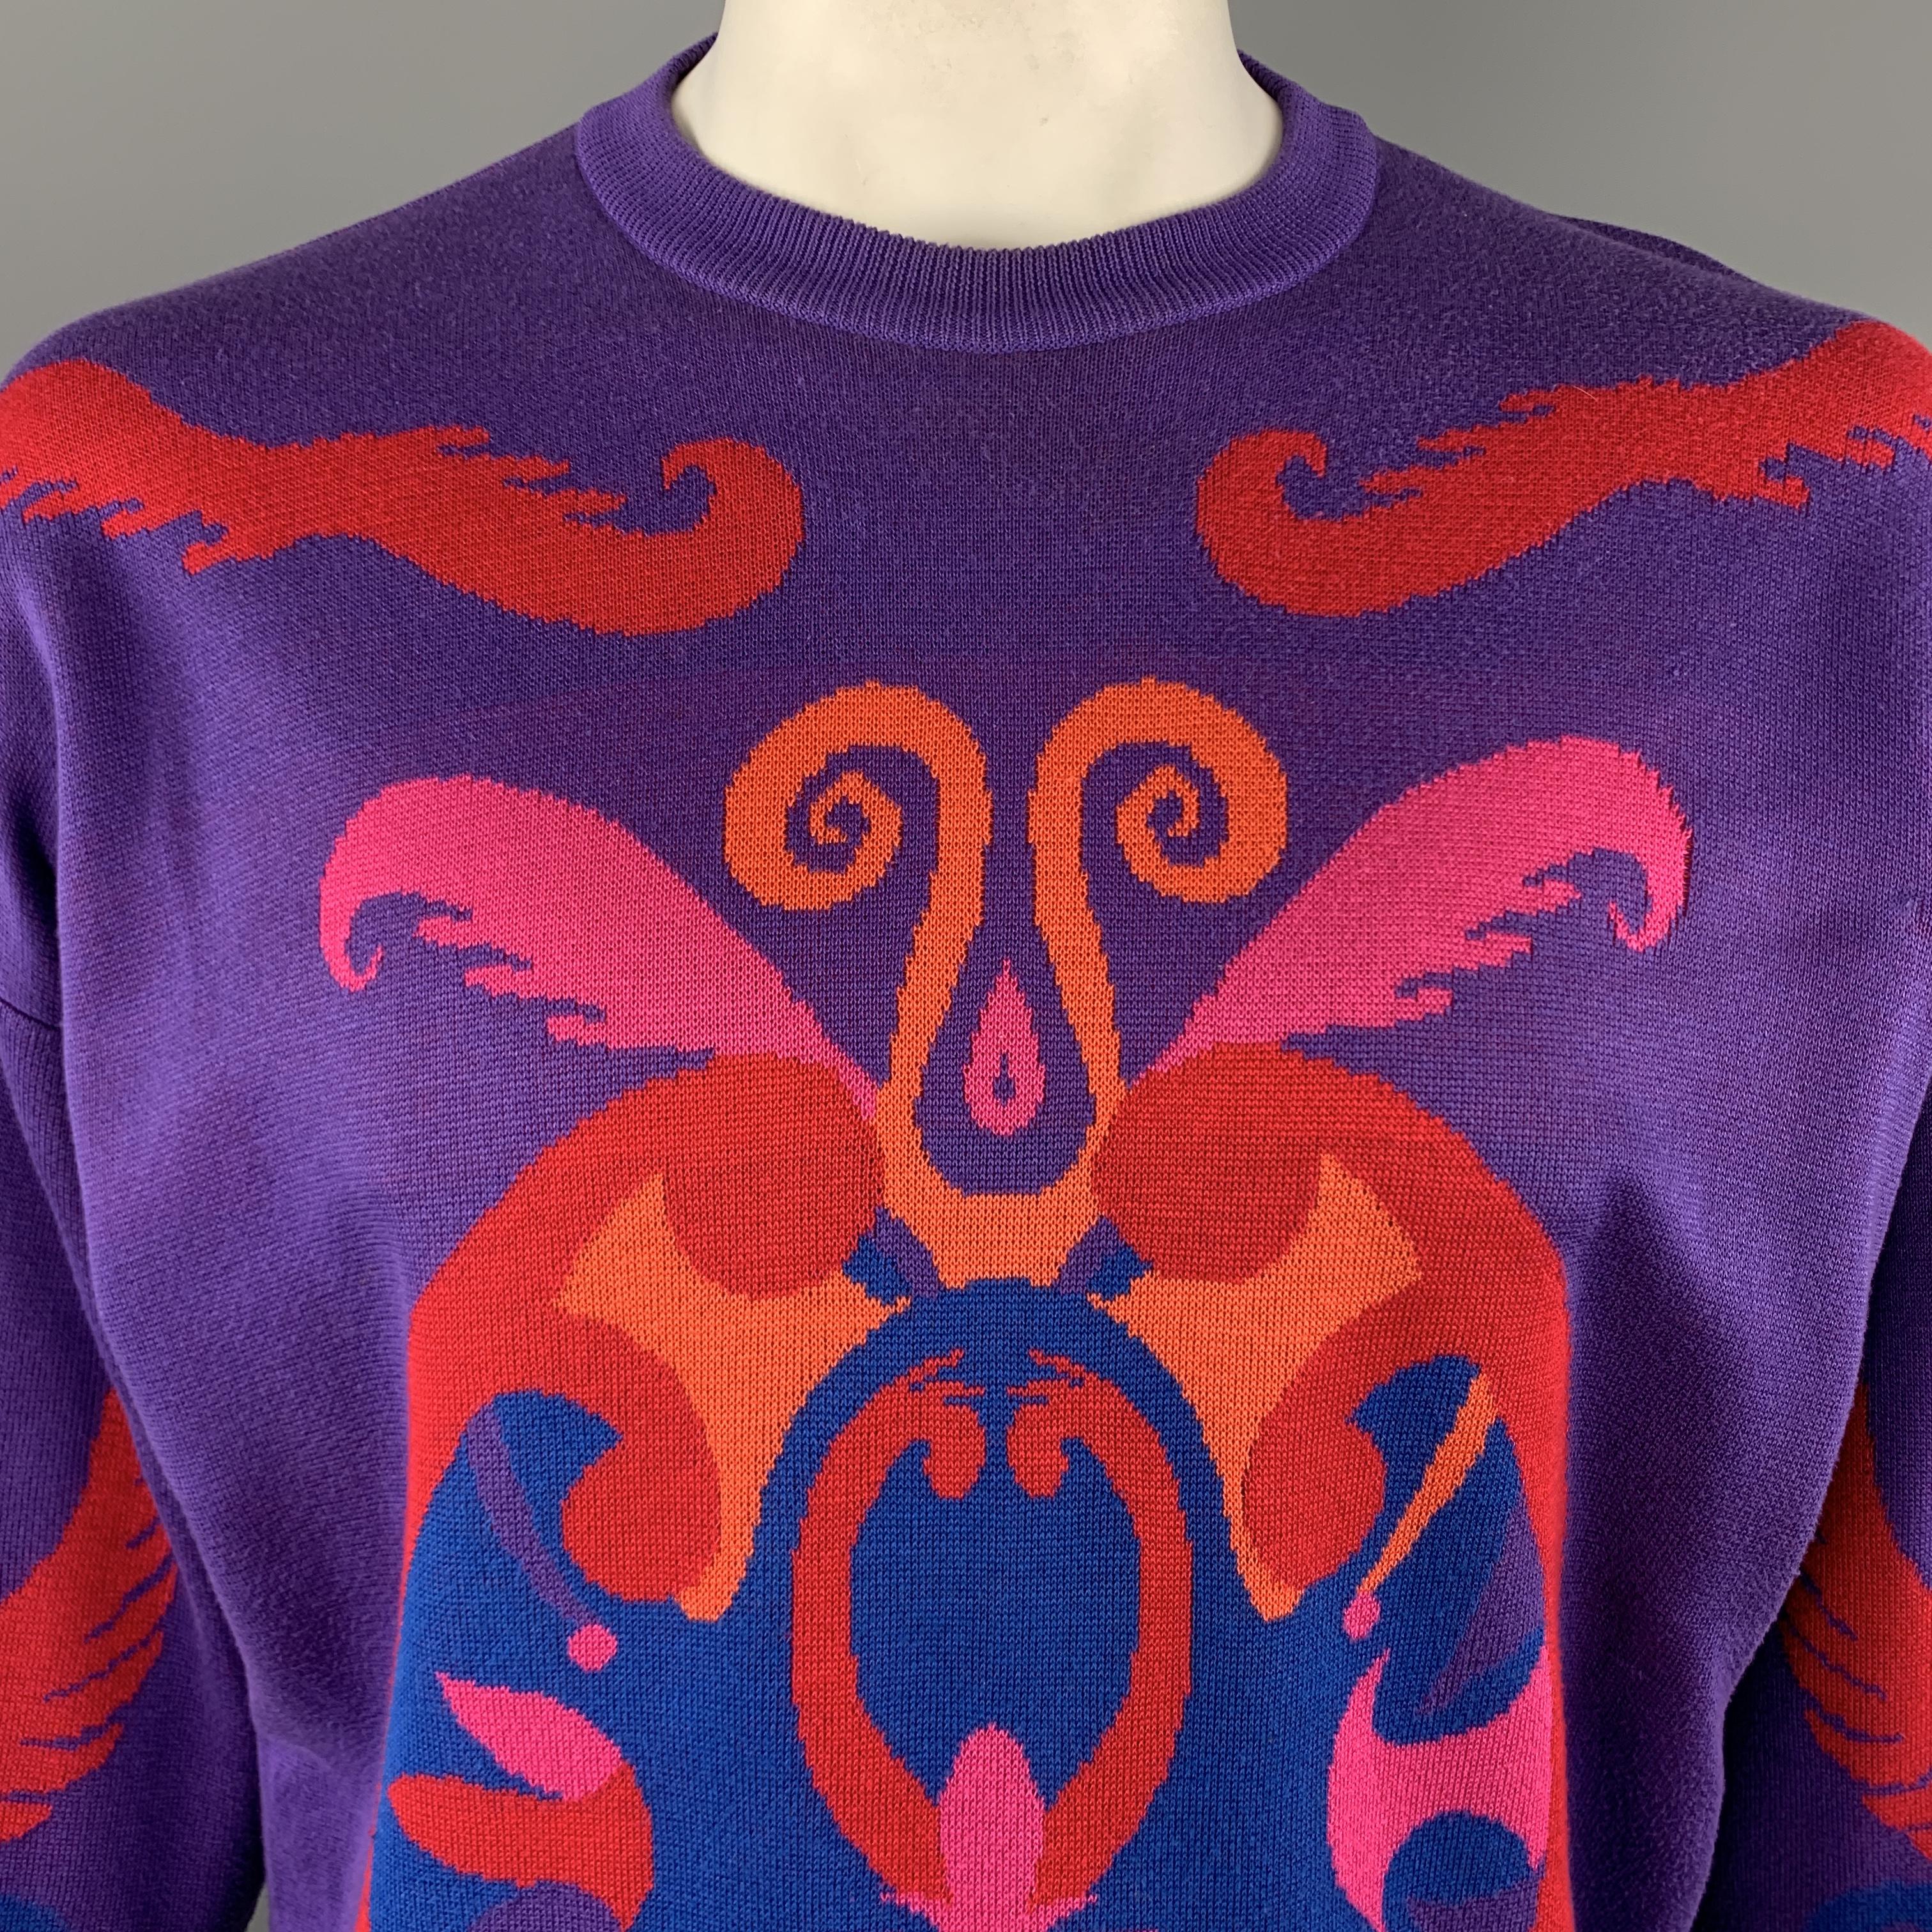 Vintage INSTANTE by GIANNI VERSACE pullover sweater comes in purple cotton knit with a vibrant pink, orange, and blue baroque style print throughout and crewneck. Minor wear and pulling throughout. As-is. Made in Italy.

Good Pre-Owned